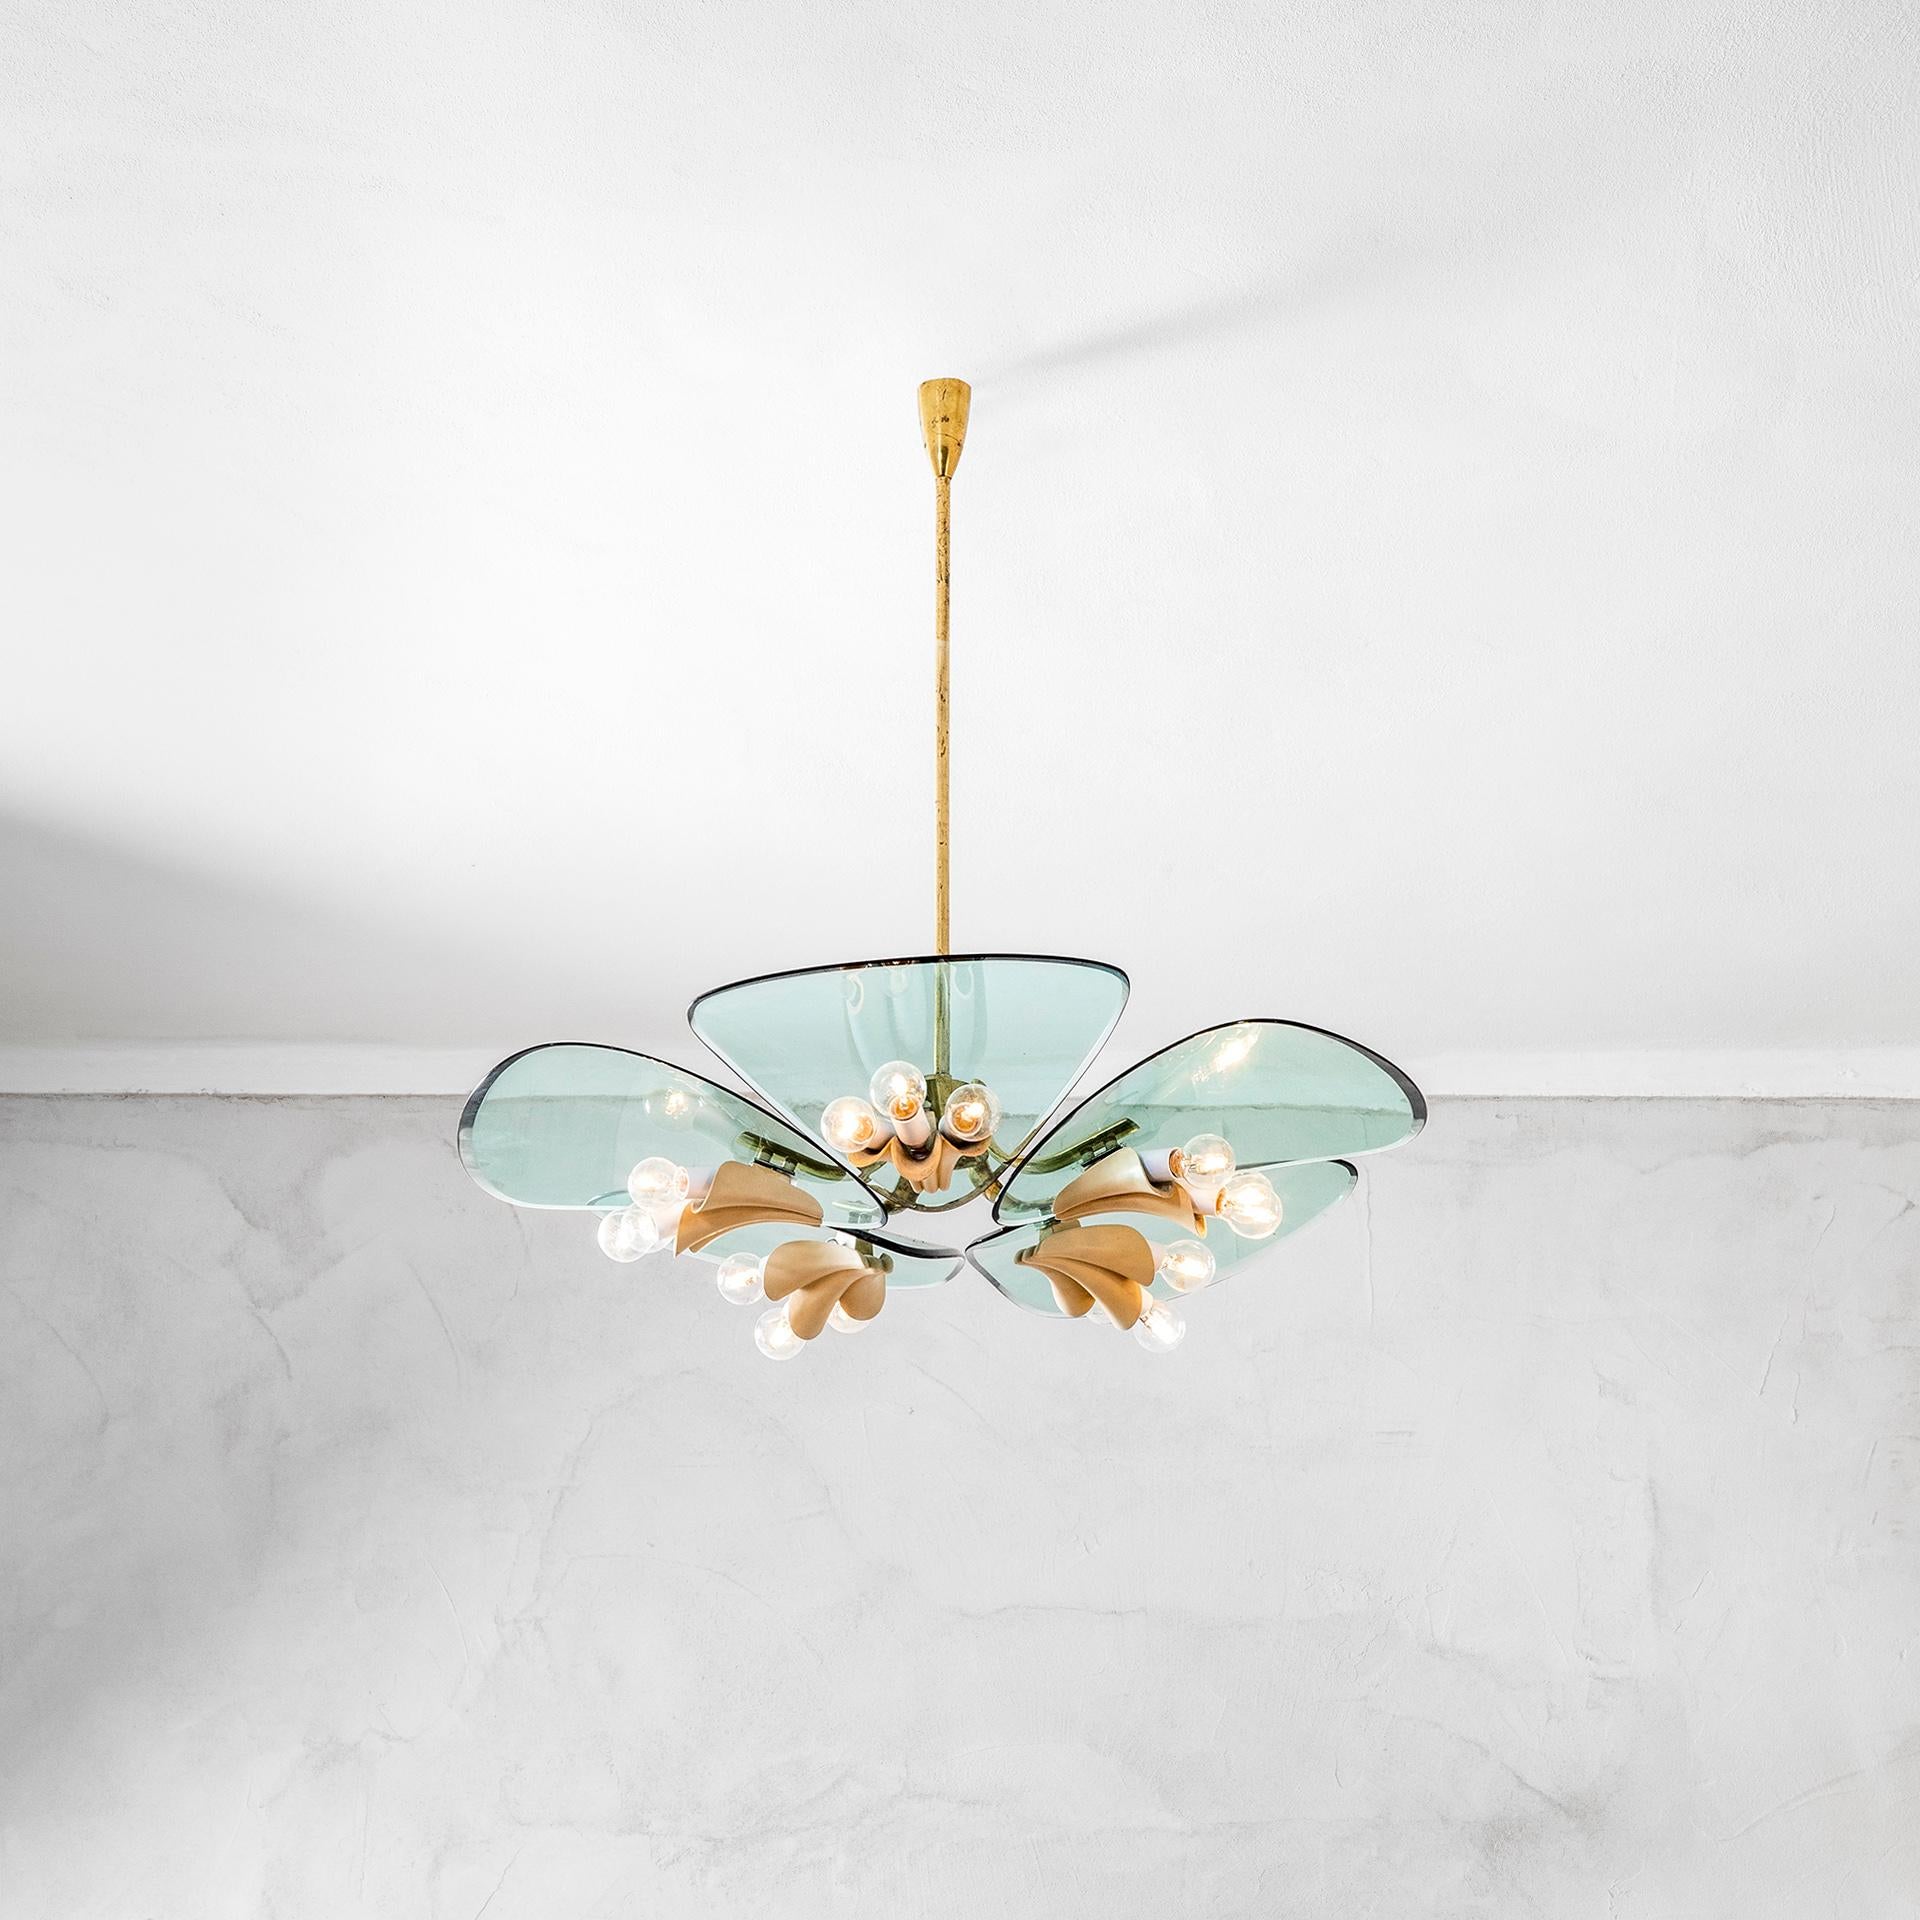 Very spectacular chandelier designed in '60s by the master of Glass Pietro Chiesa for Fontana Arte. The chandelier has the structure in brass, and the diffusers are like petals that open on a flower. Each 